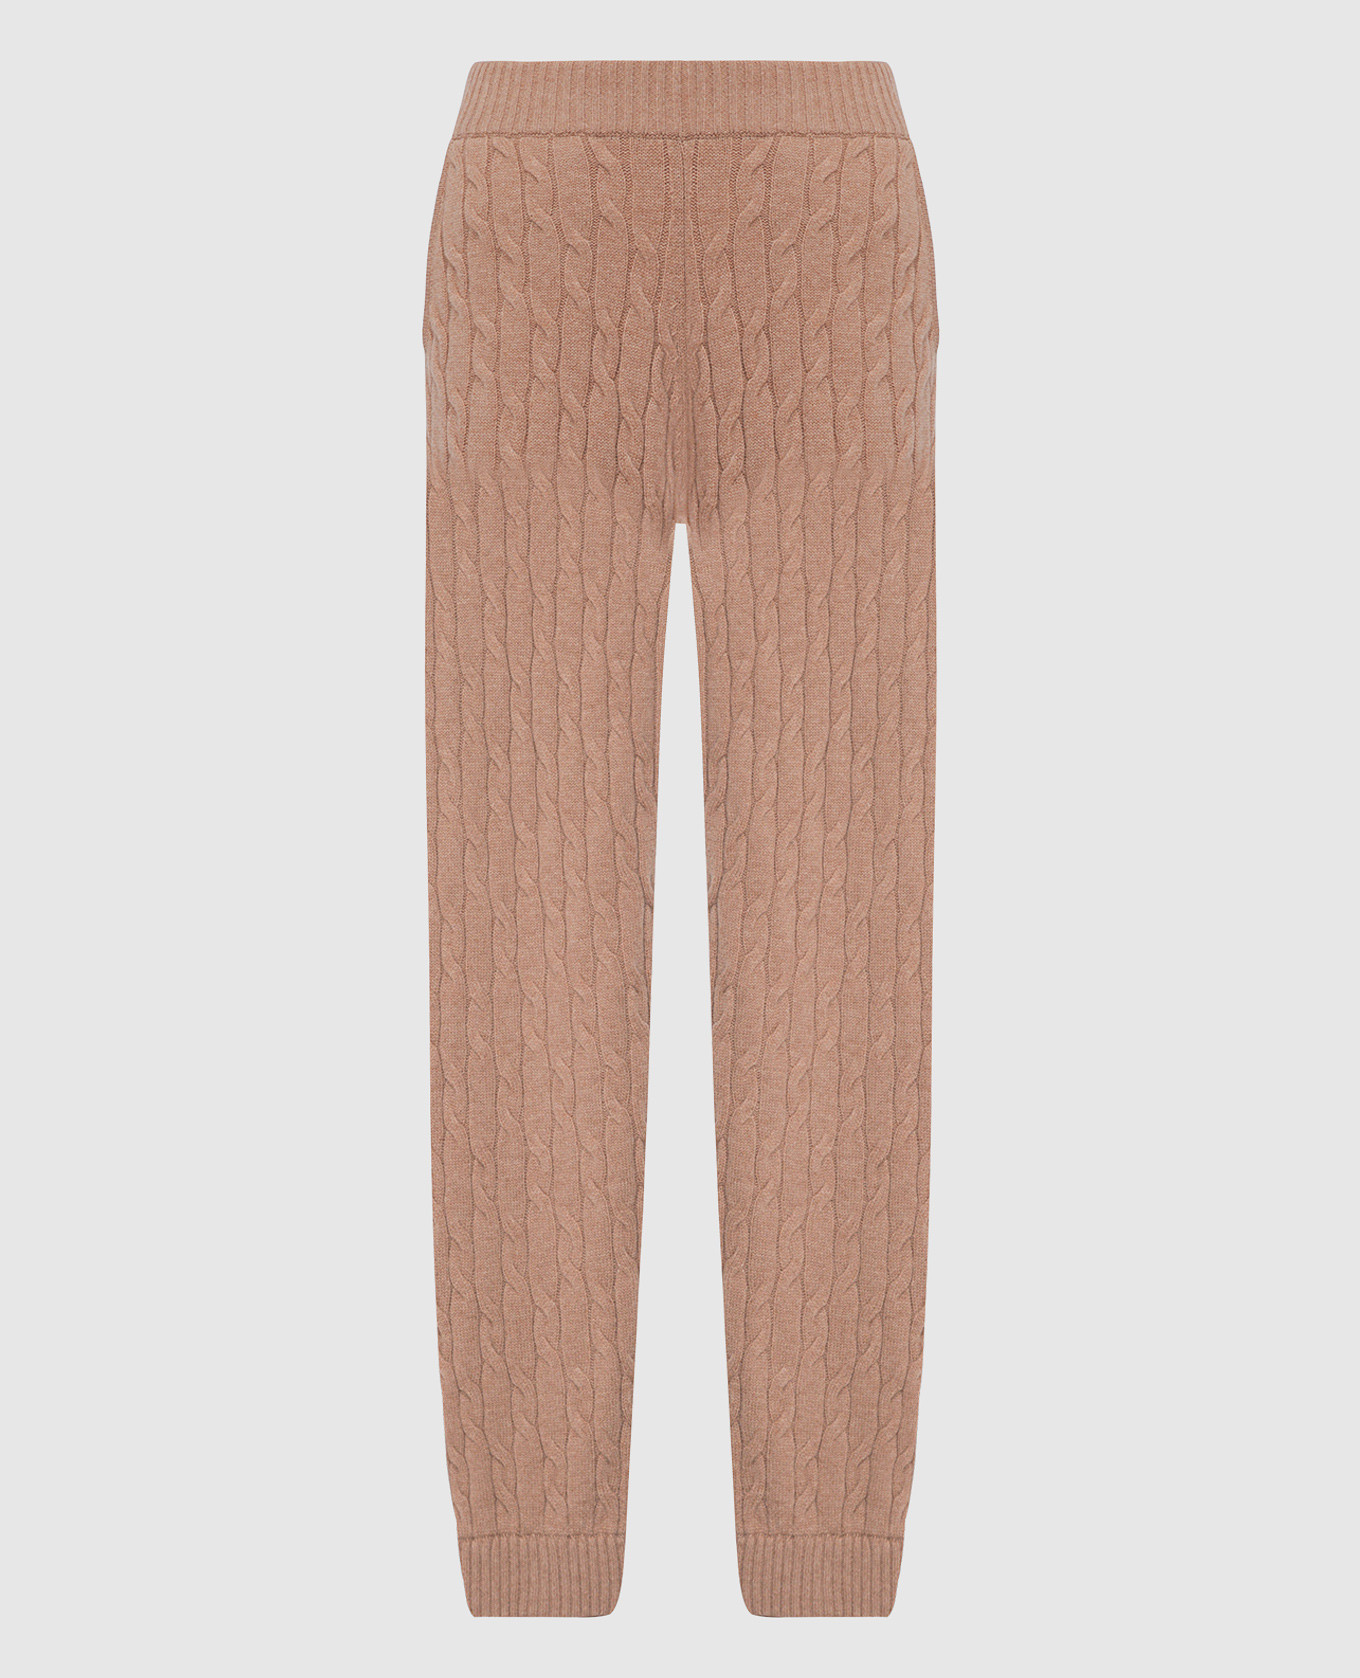 Brown joggers made of wool in a textured pattern